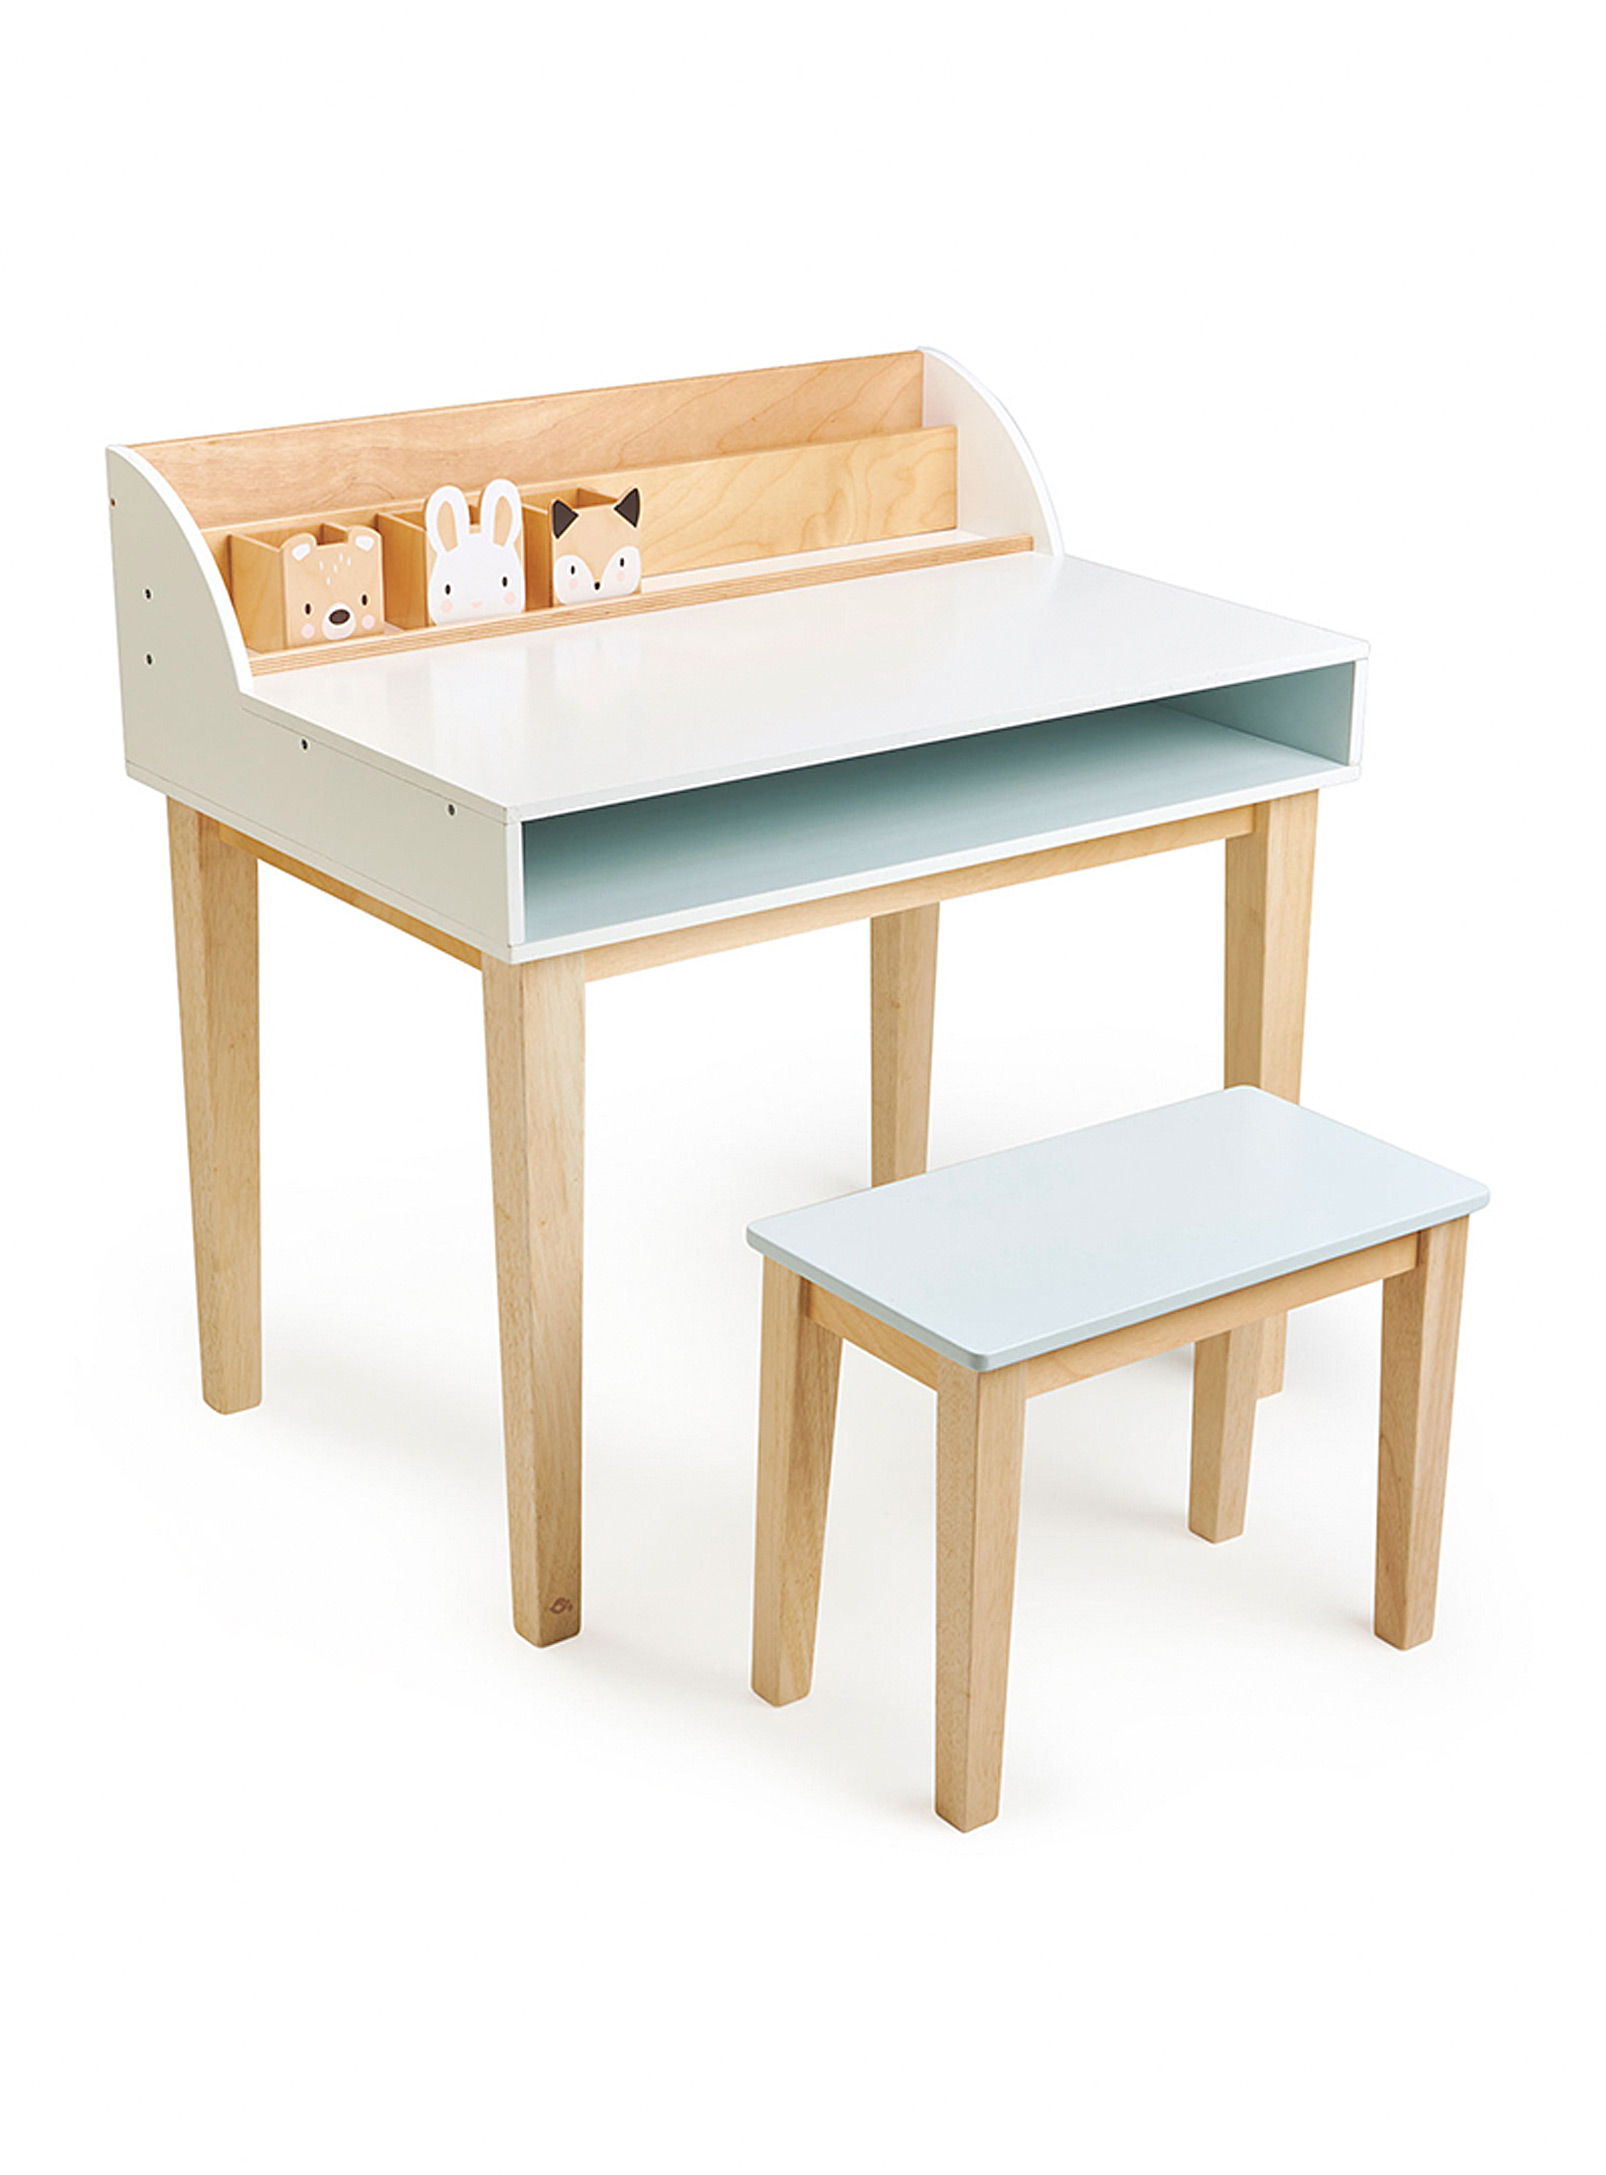 Tender Leaf Toys - Wooden desk and chair